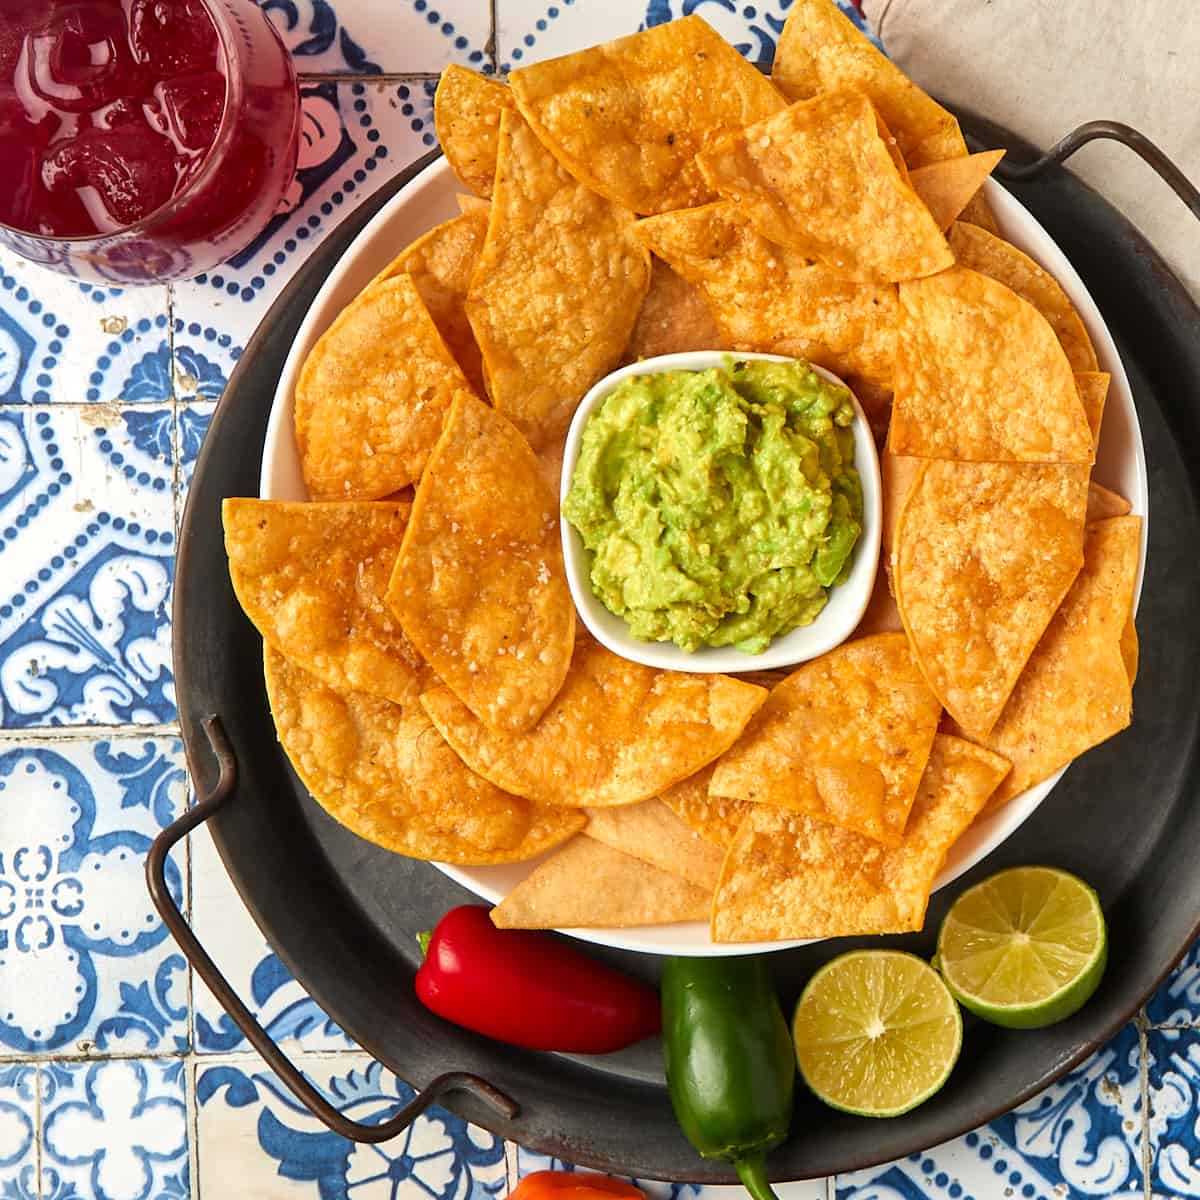 fried tortilla chips in a bowl with a side of guacamole along with a margarita on the rocks.